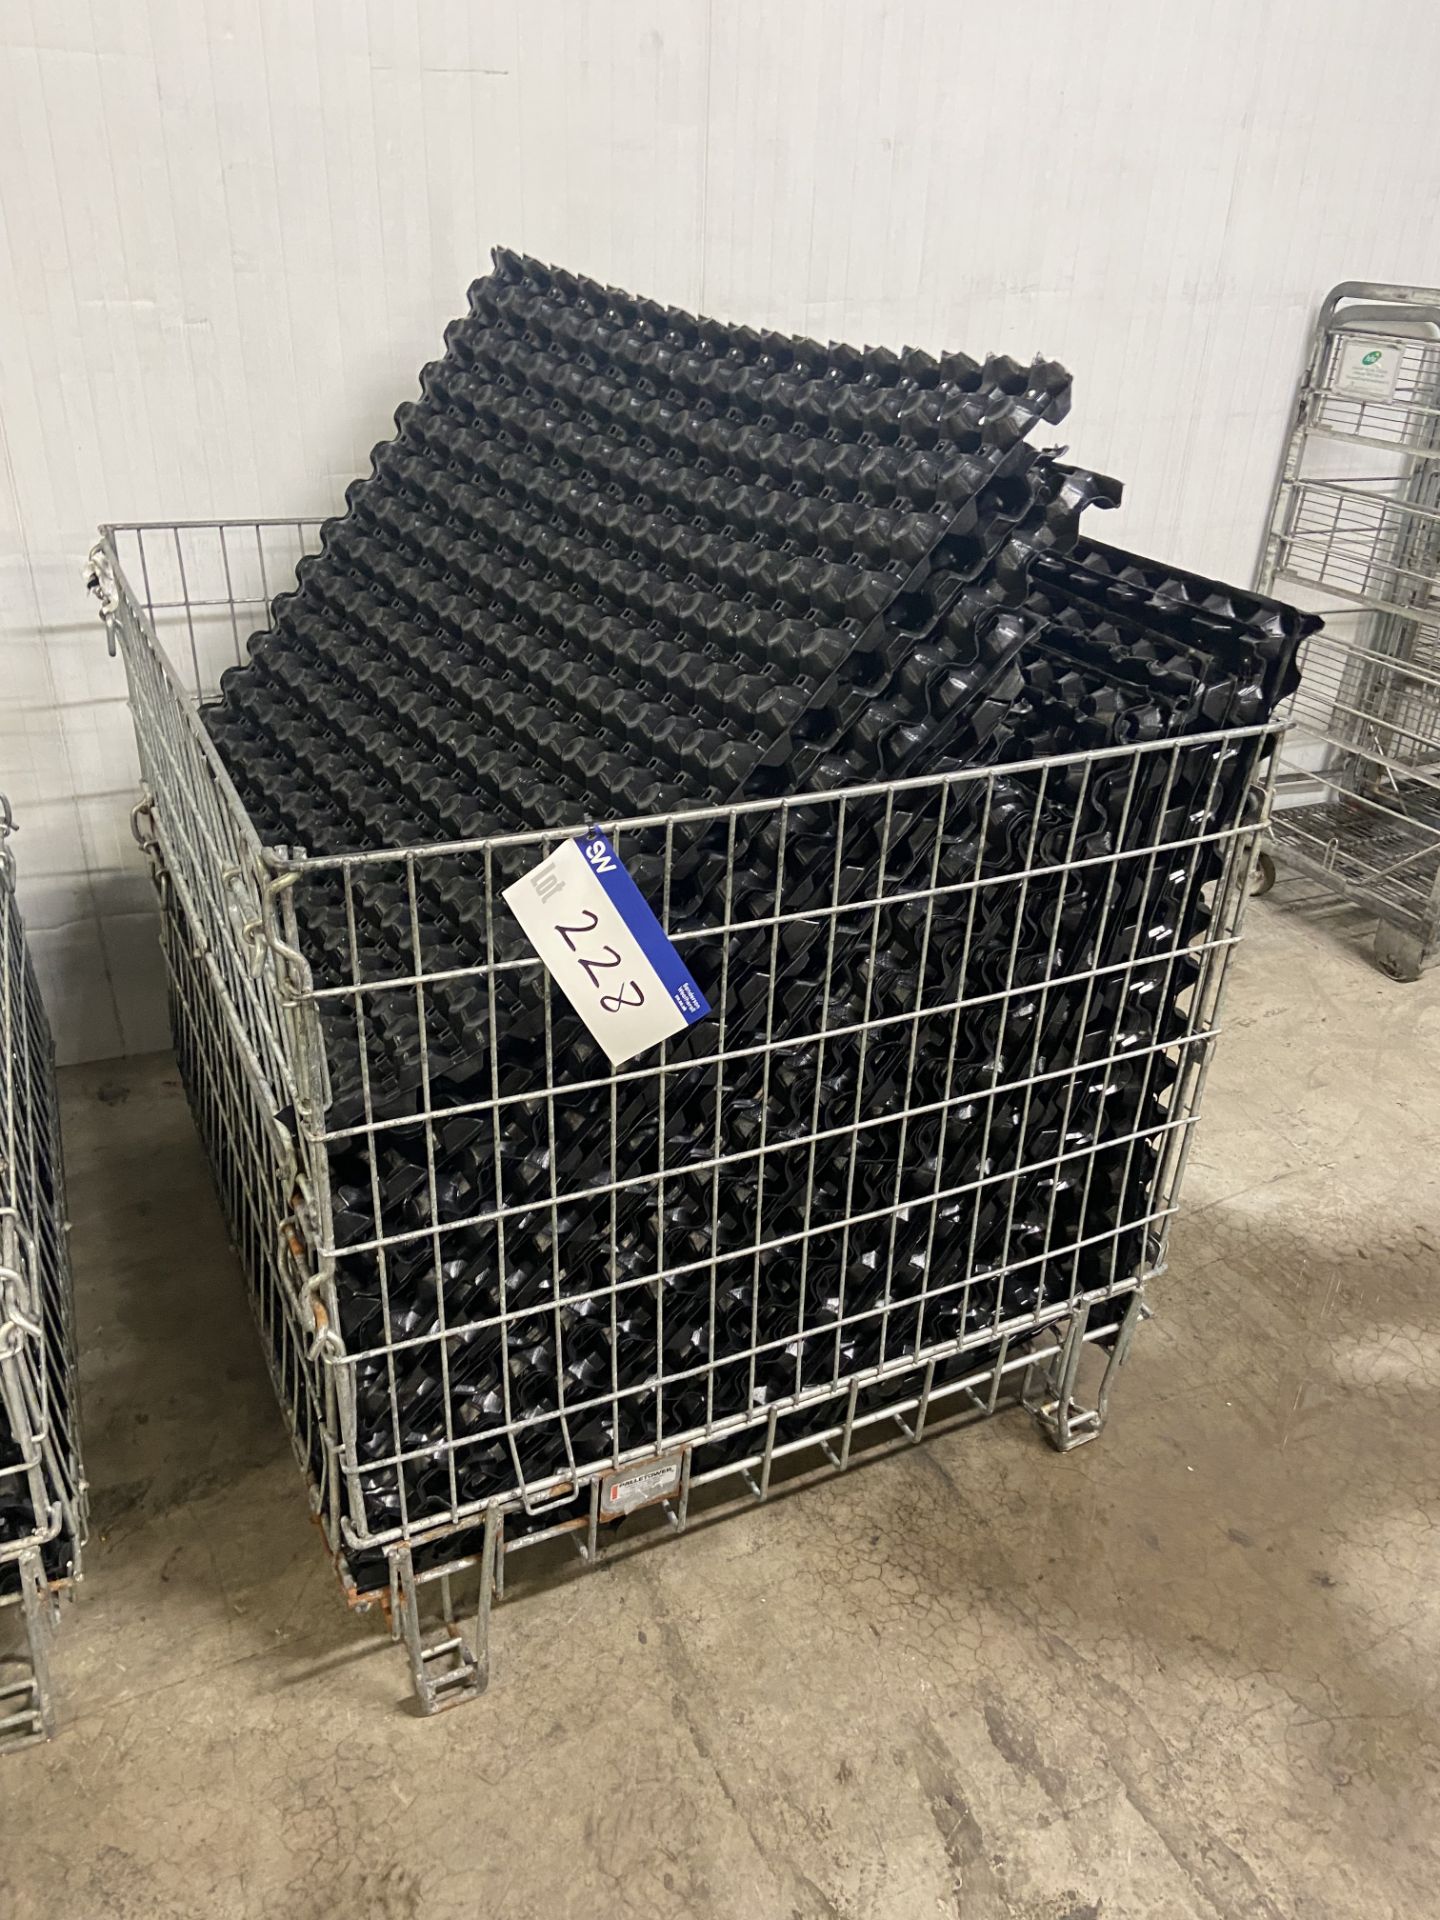 Galvanised Steel Collapsible Cage Box Pallet, approx. 1.2m x 1m x approx. 800mm deep, with plastic